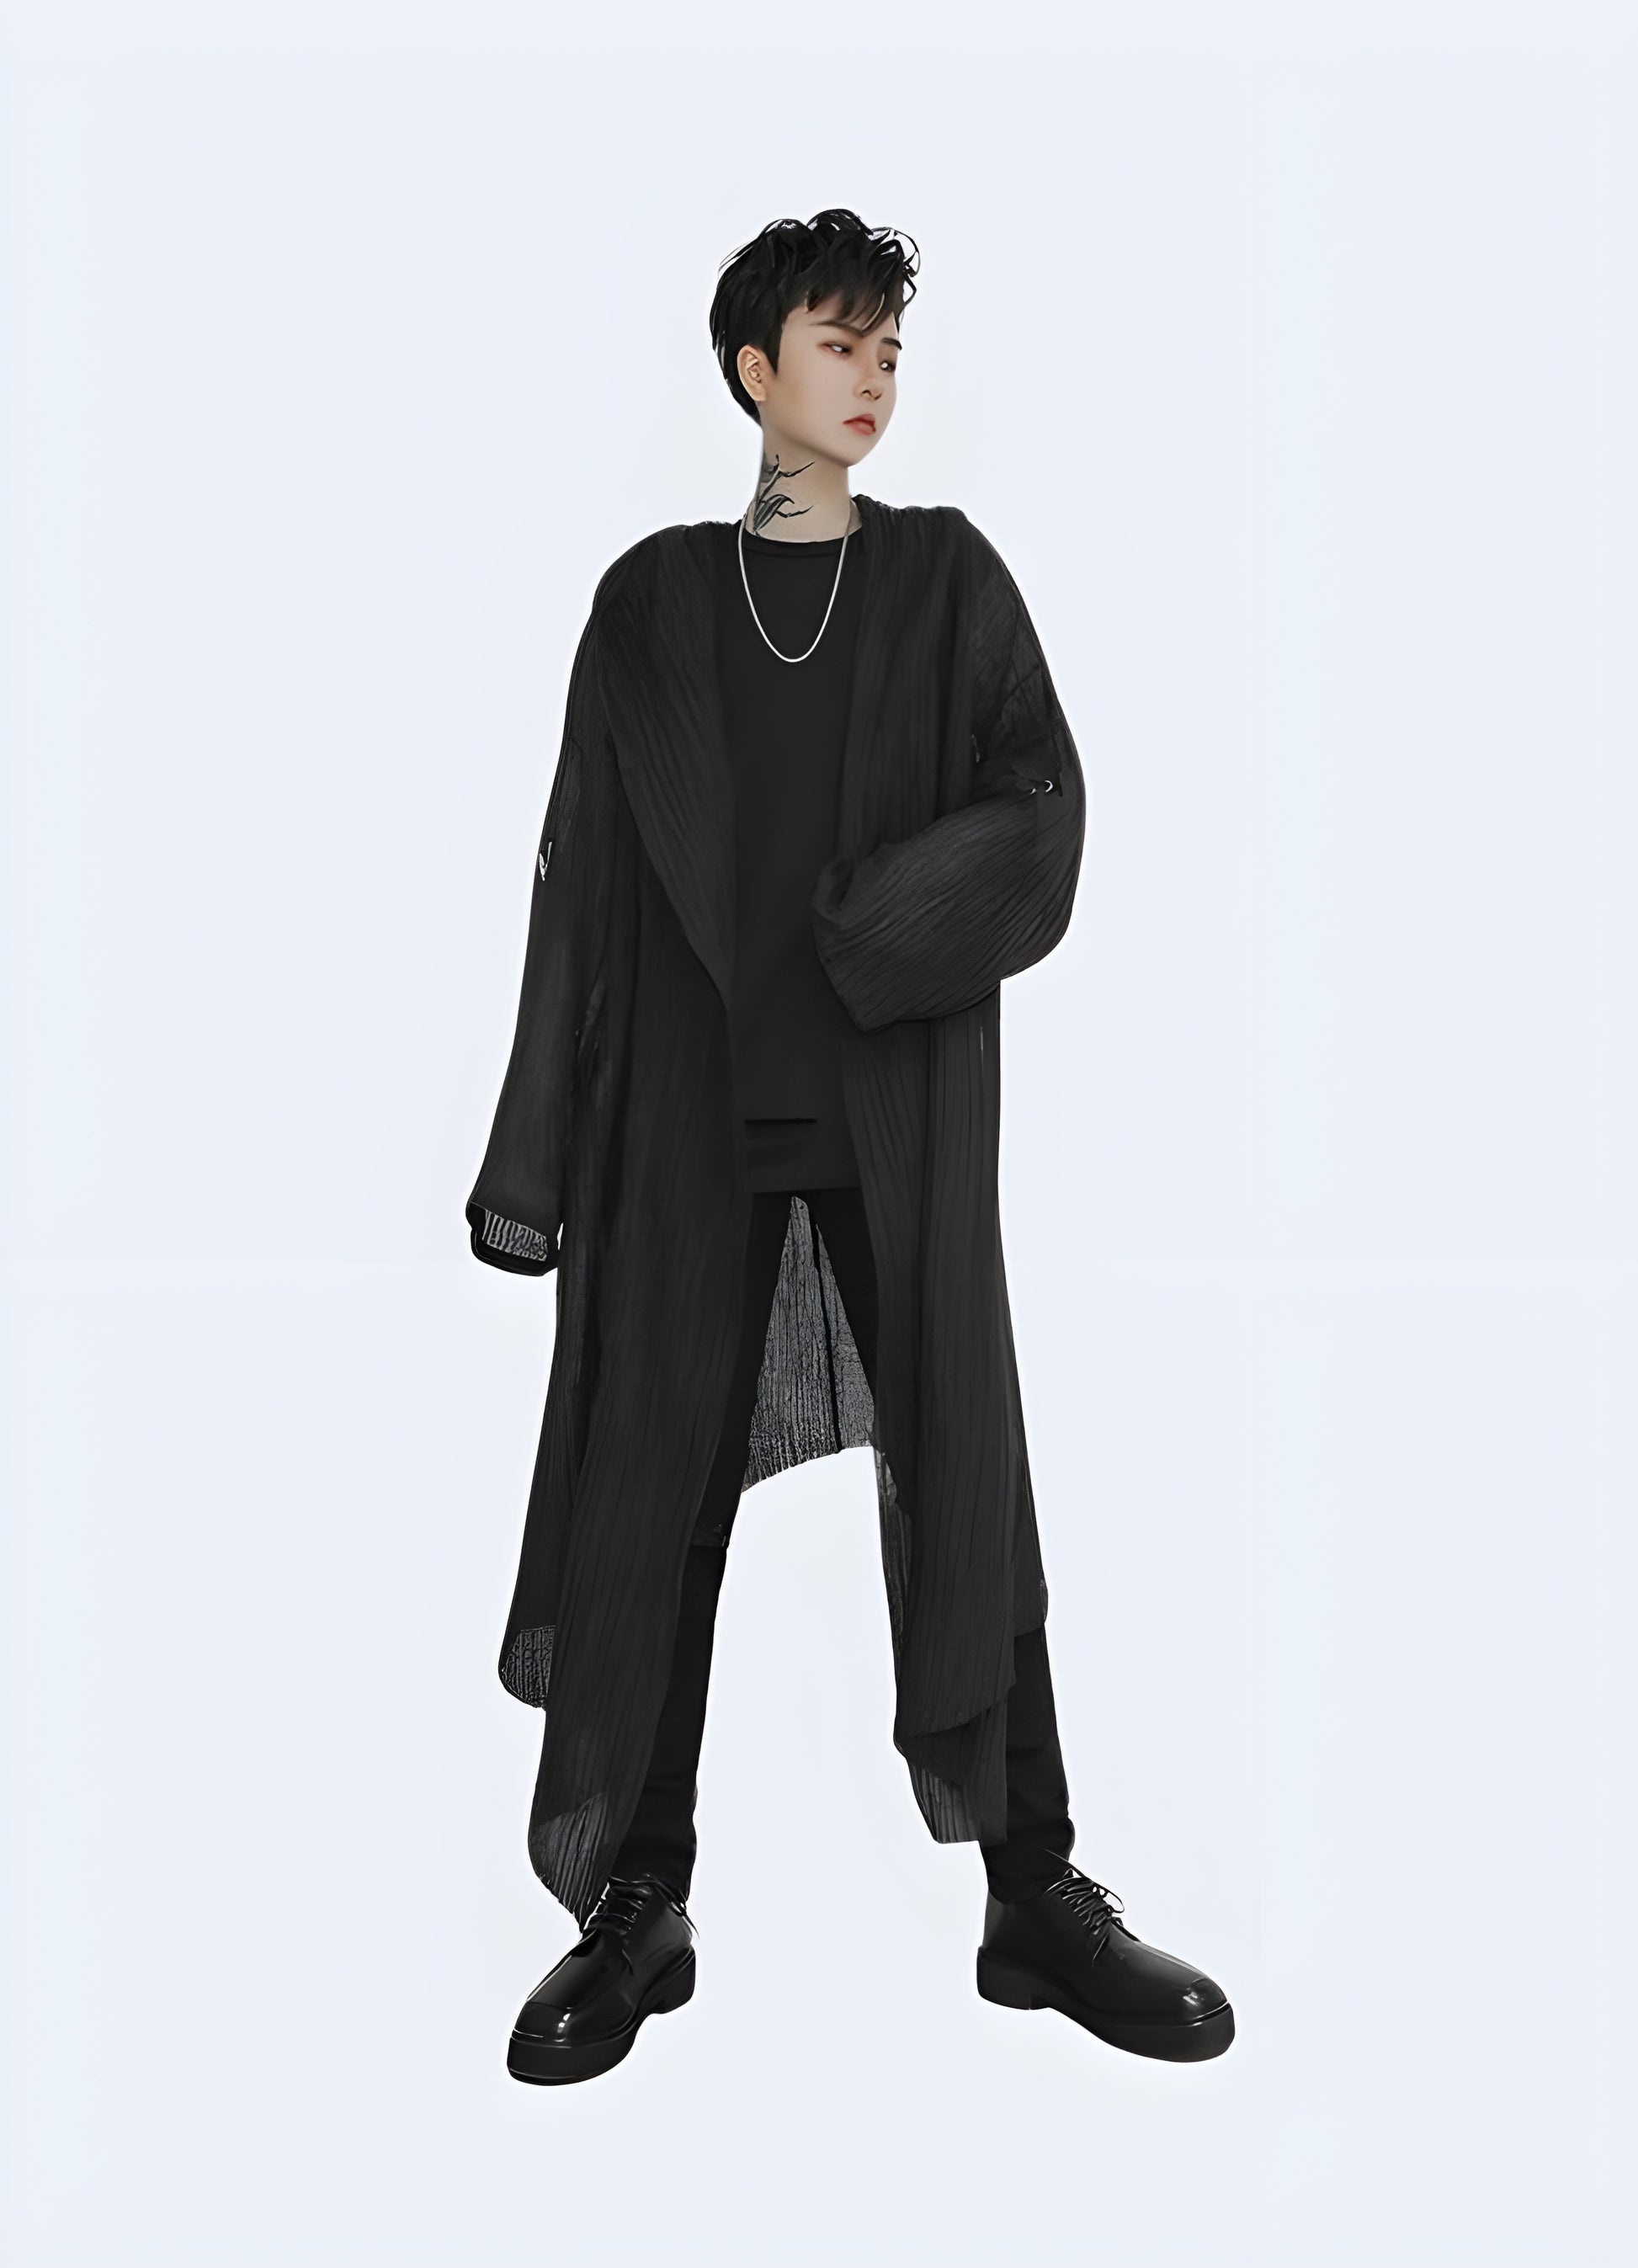 Cloak with hood v neck collar style.